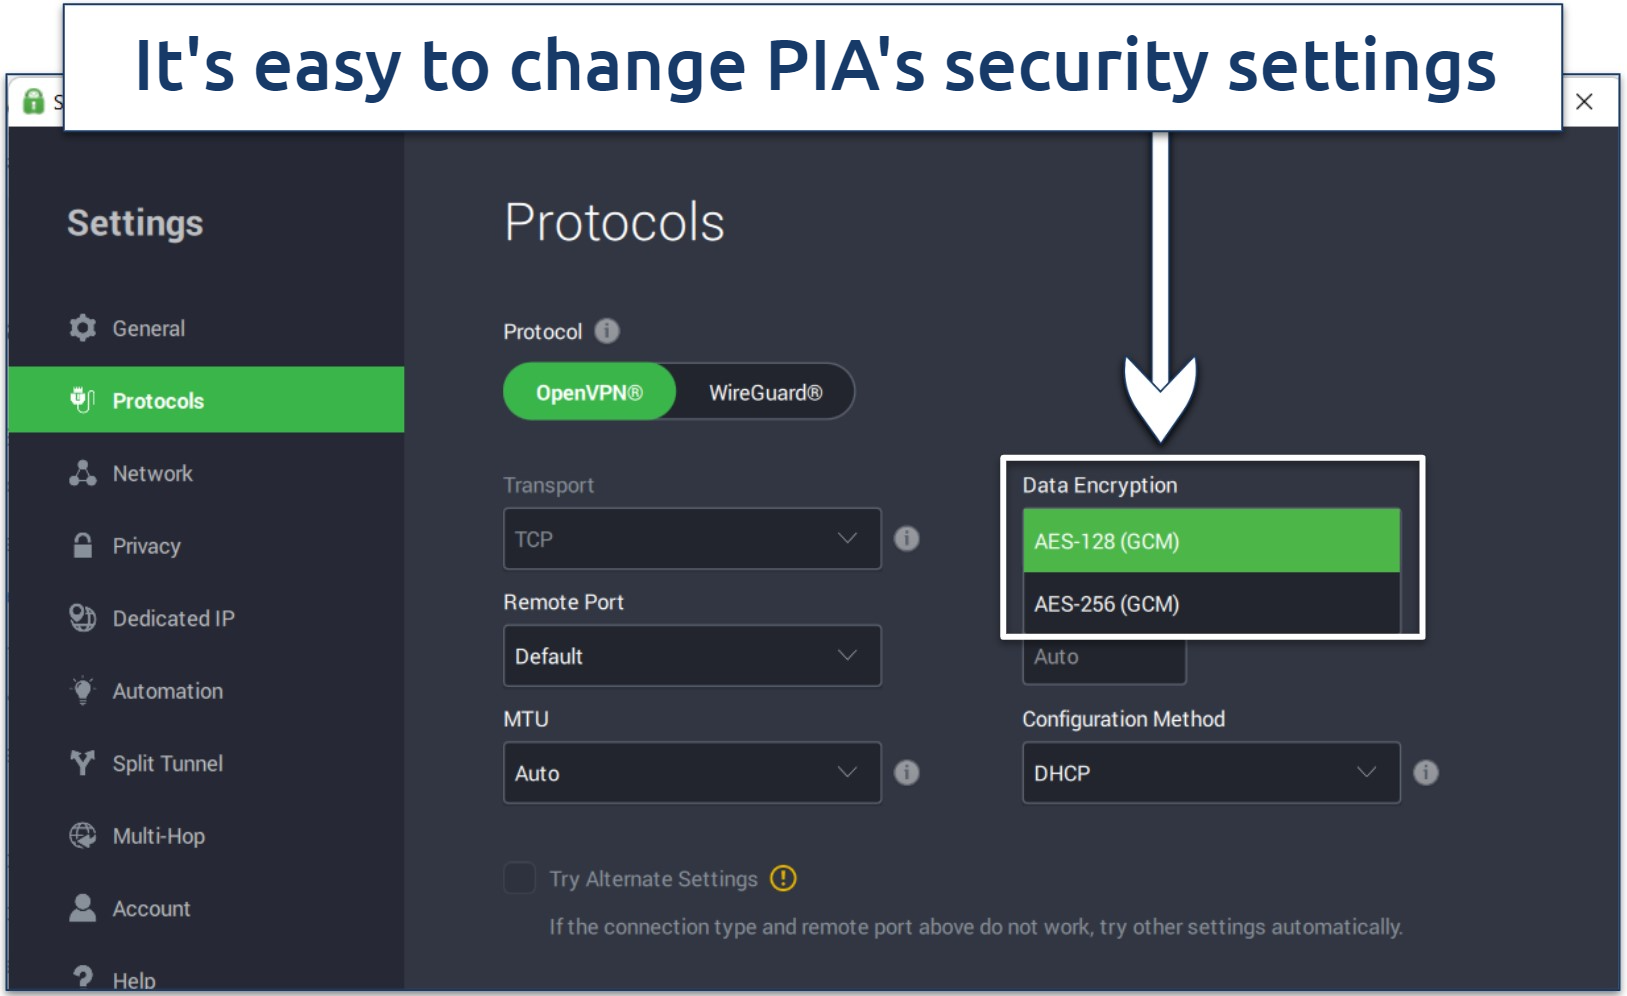 Screenshot showing how to access PIA's security settings